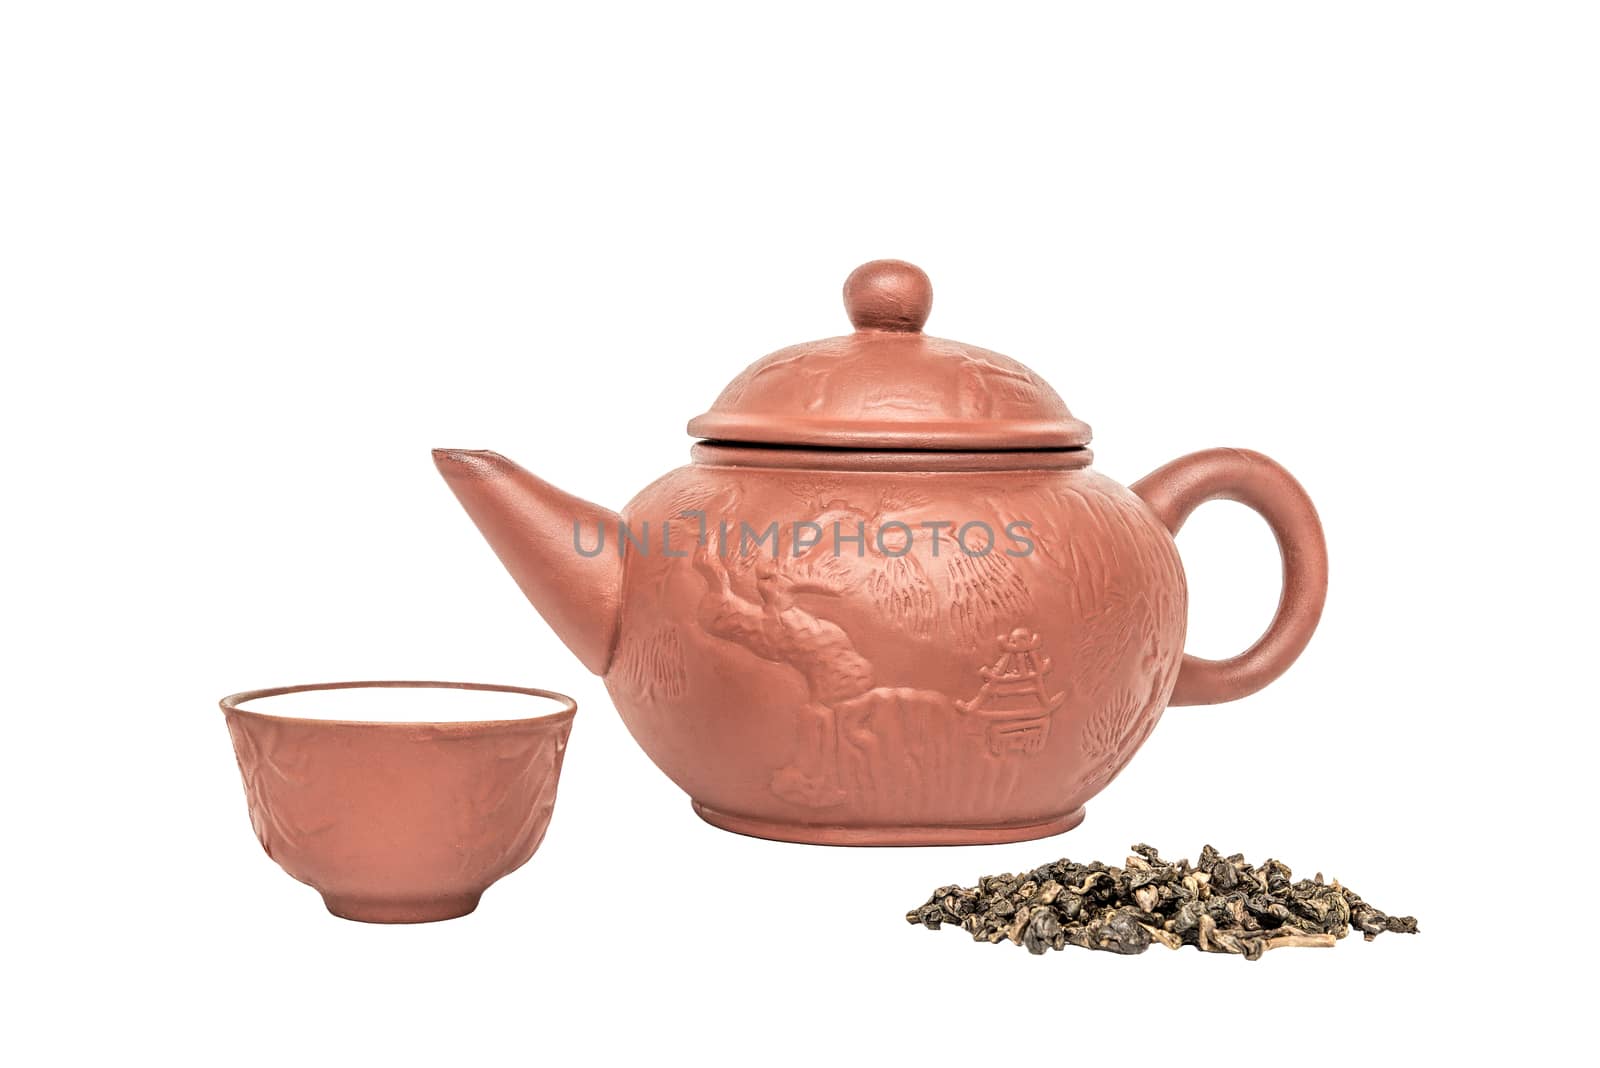 Chinese teapot, teacup, tea leaves, isolated on white background